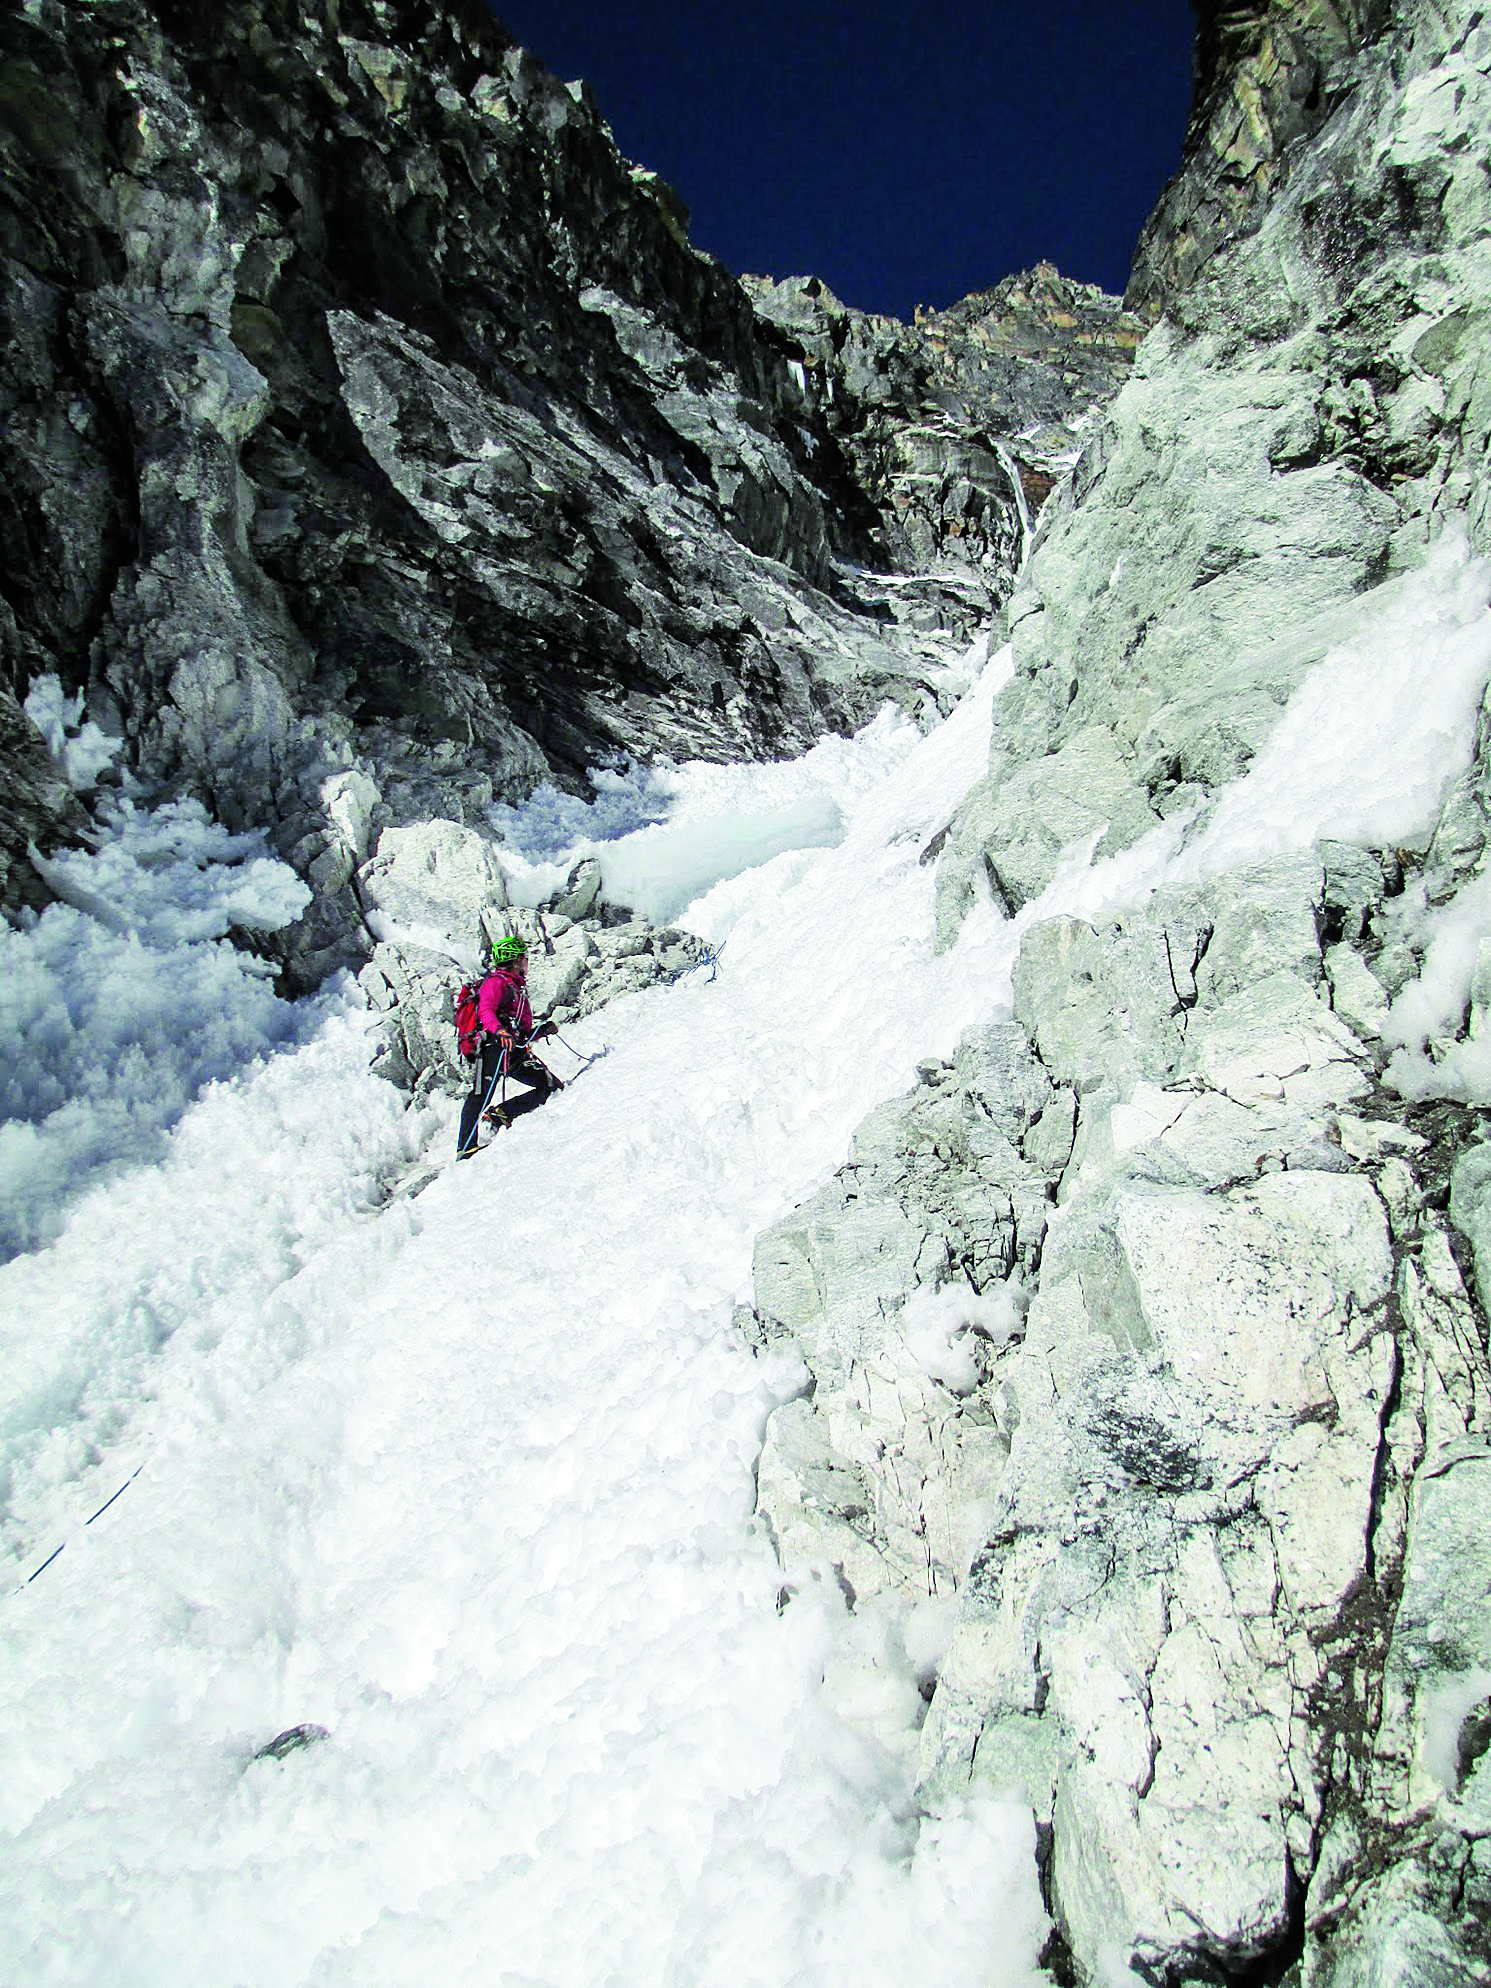 Anna Pfaff leads up the couloir on Lungaretse, Marlung Valley, Nepal. [Photo] Camilo Lopez